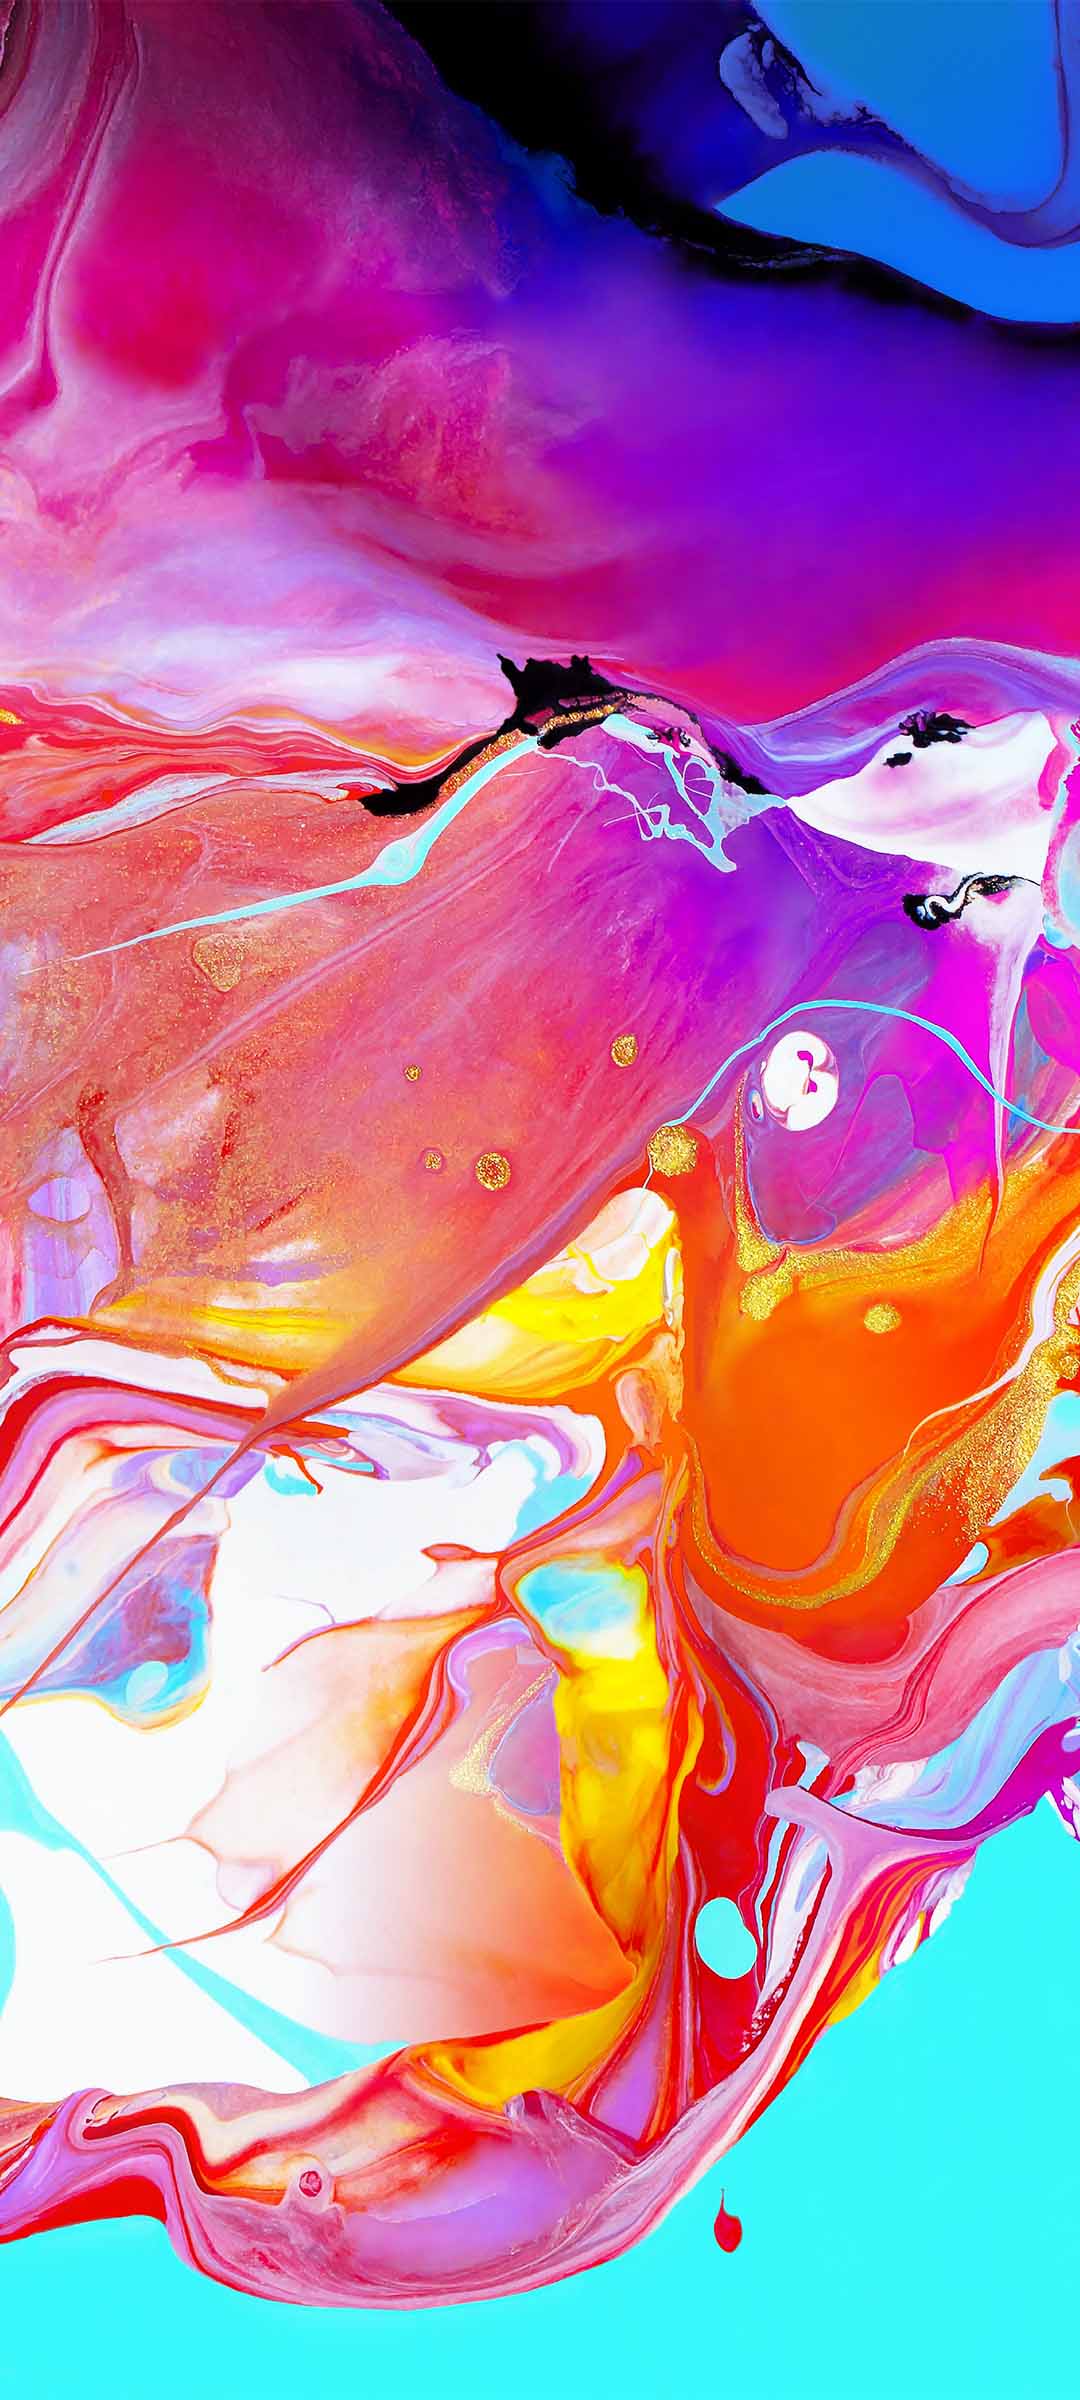 Samsung Galaxy A70 Wallpapers FHD Download DroidViews